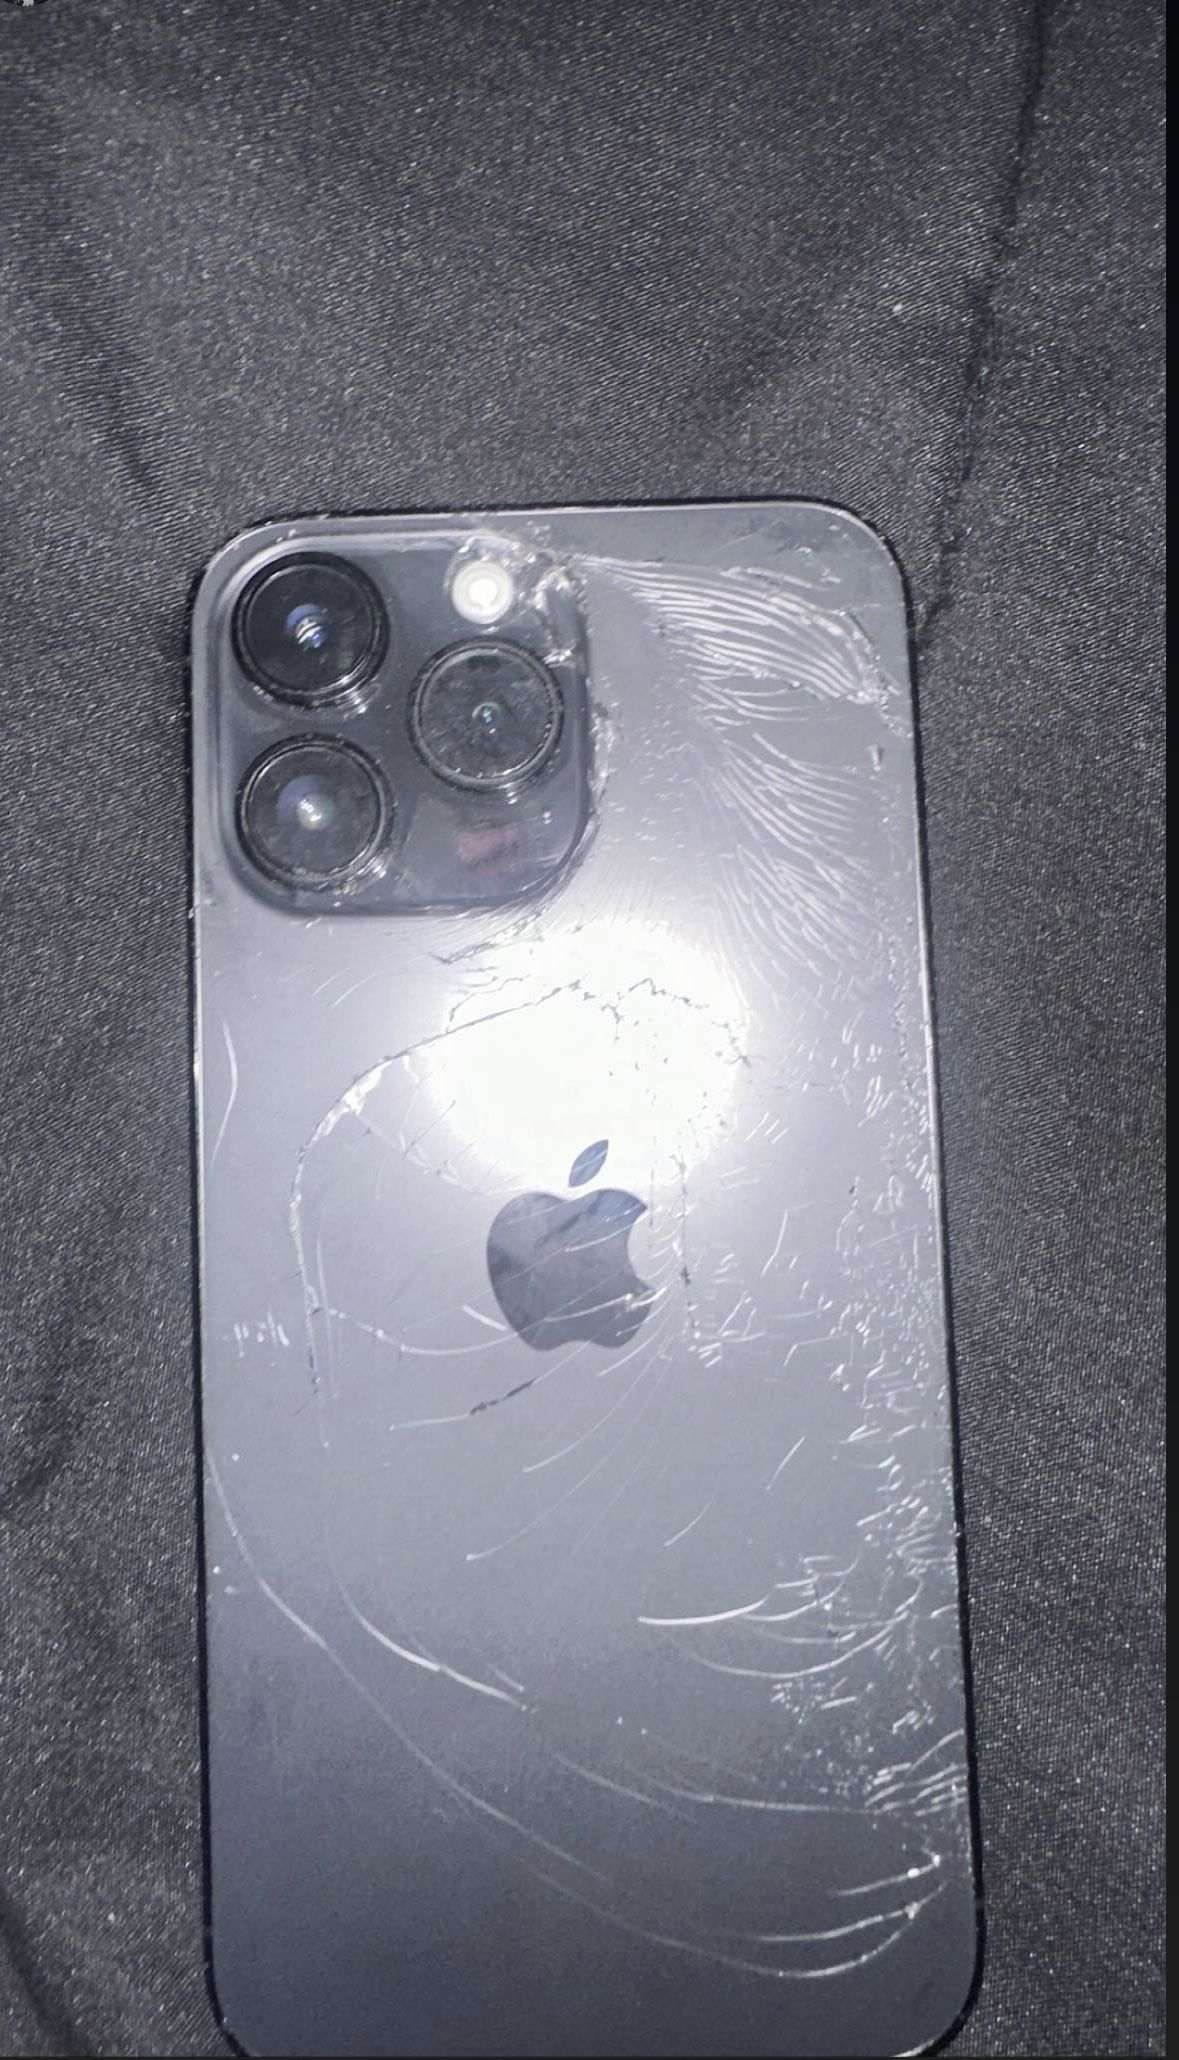 Works Back Just Needs To Be Fixed Or Yu Can Just Put A Case On The Back 